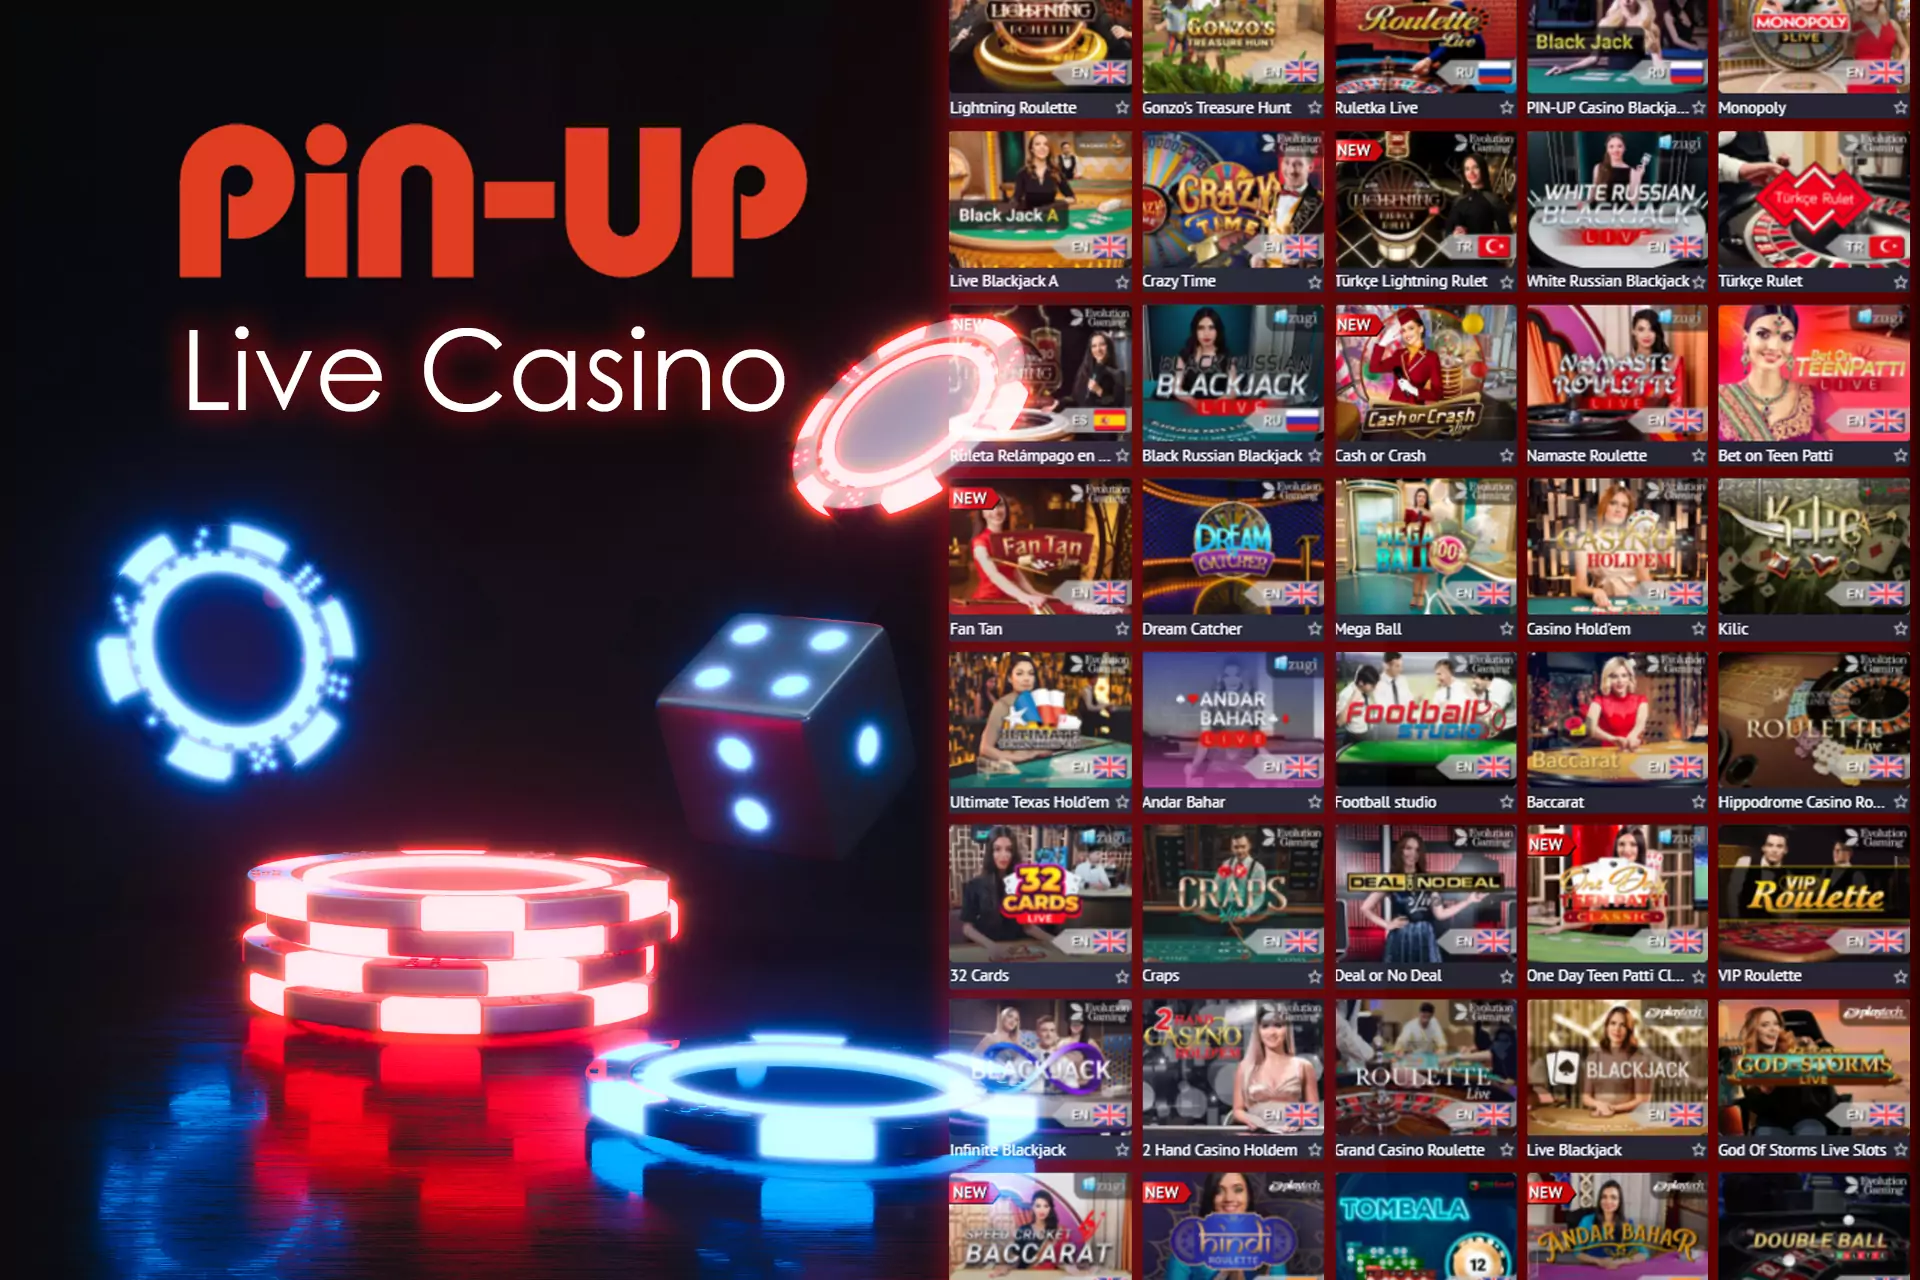 In the Live Casino section, you can play with live dealers and other players.